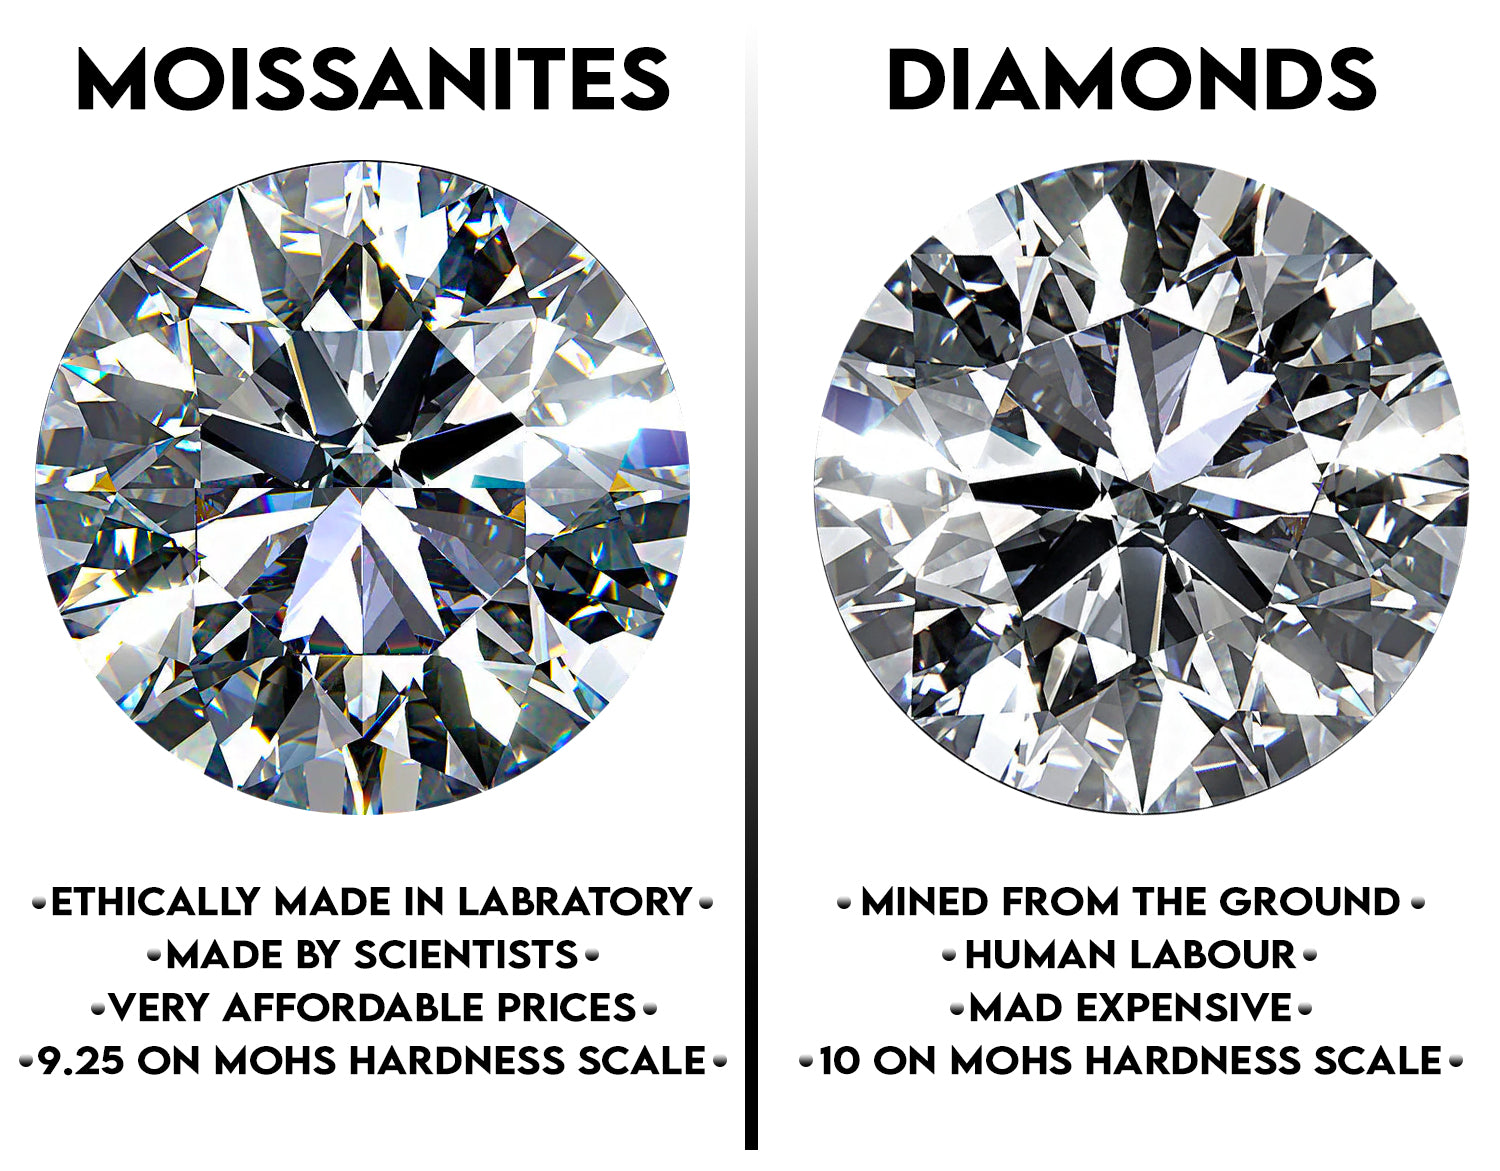 What are Moissanites?